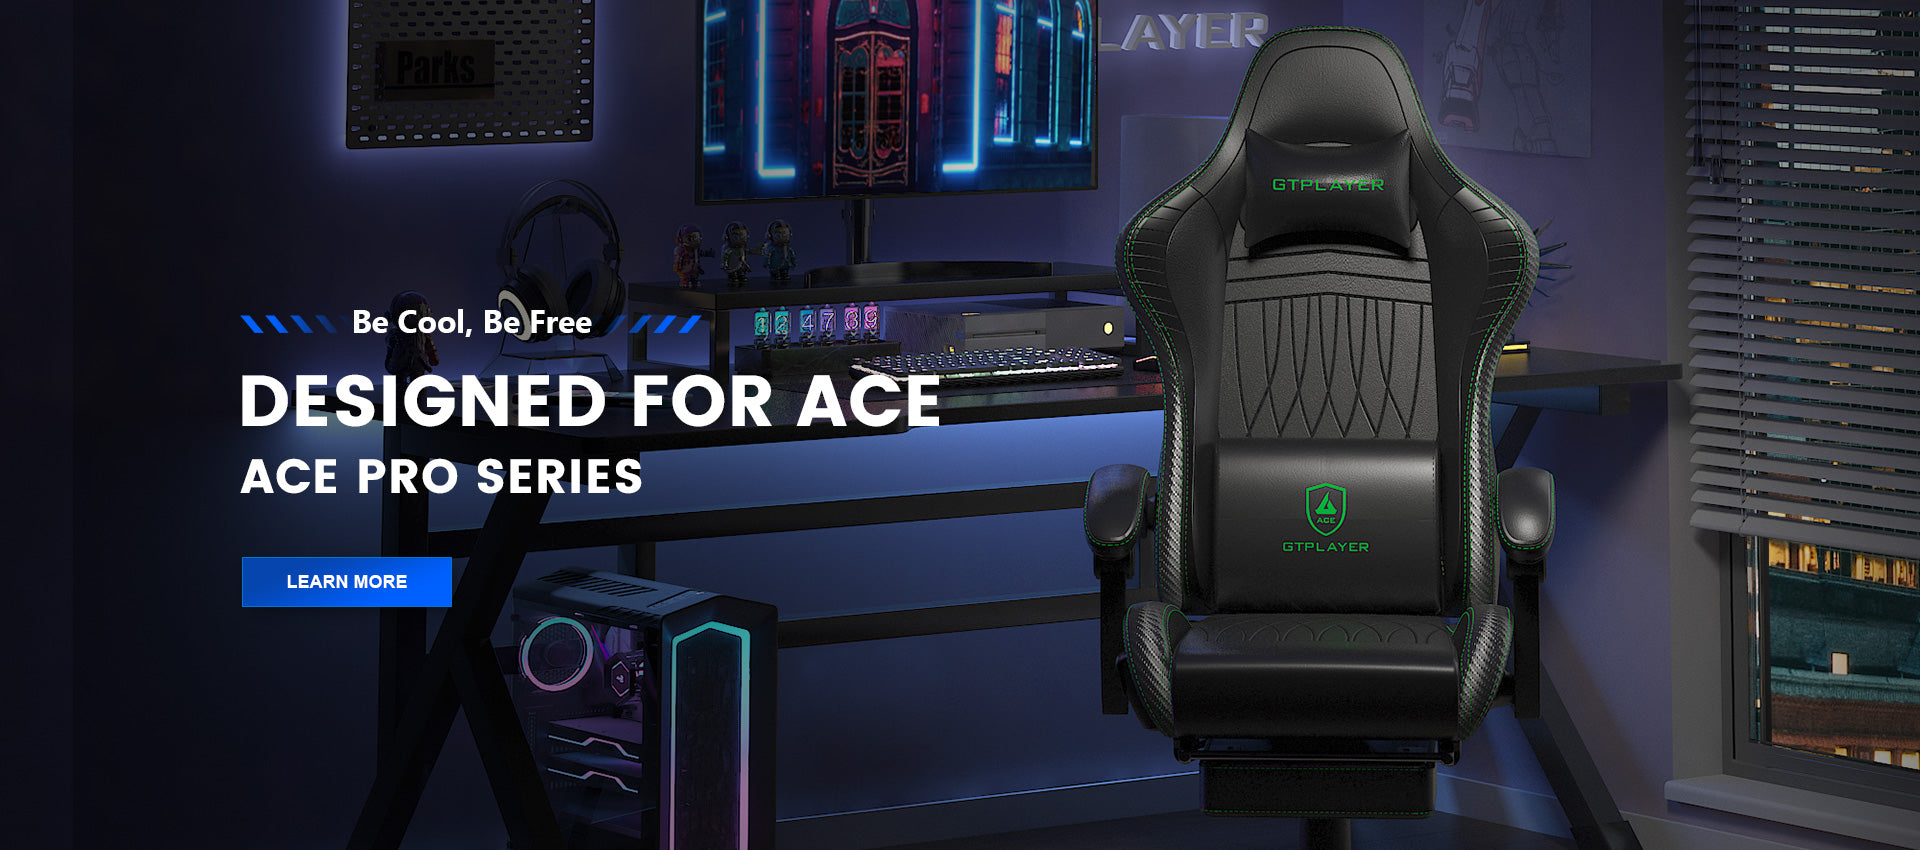 DESIGNED FOR ACE